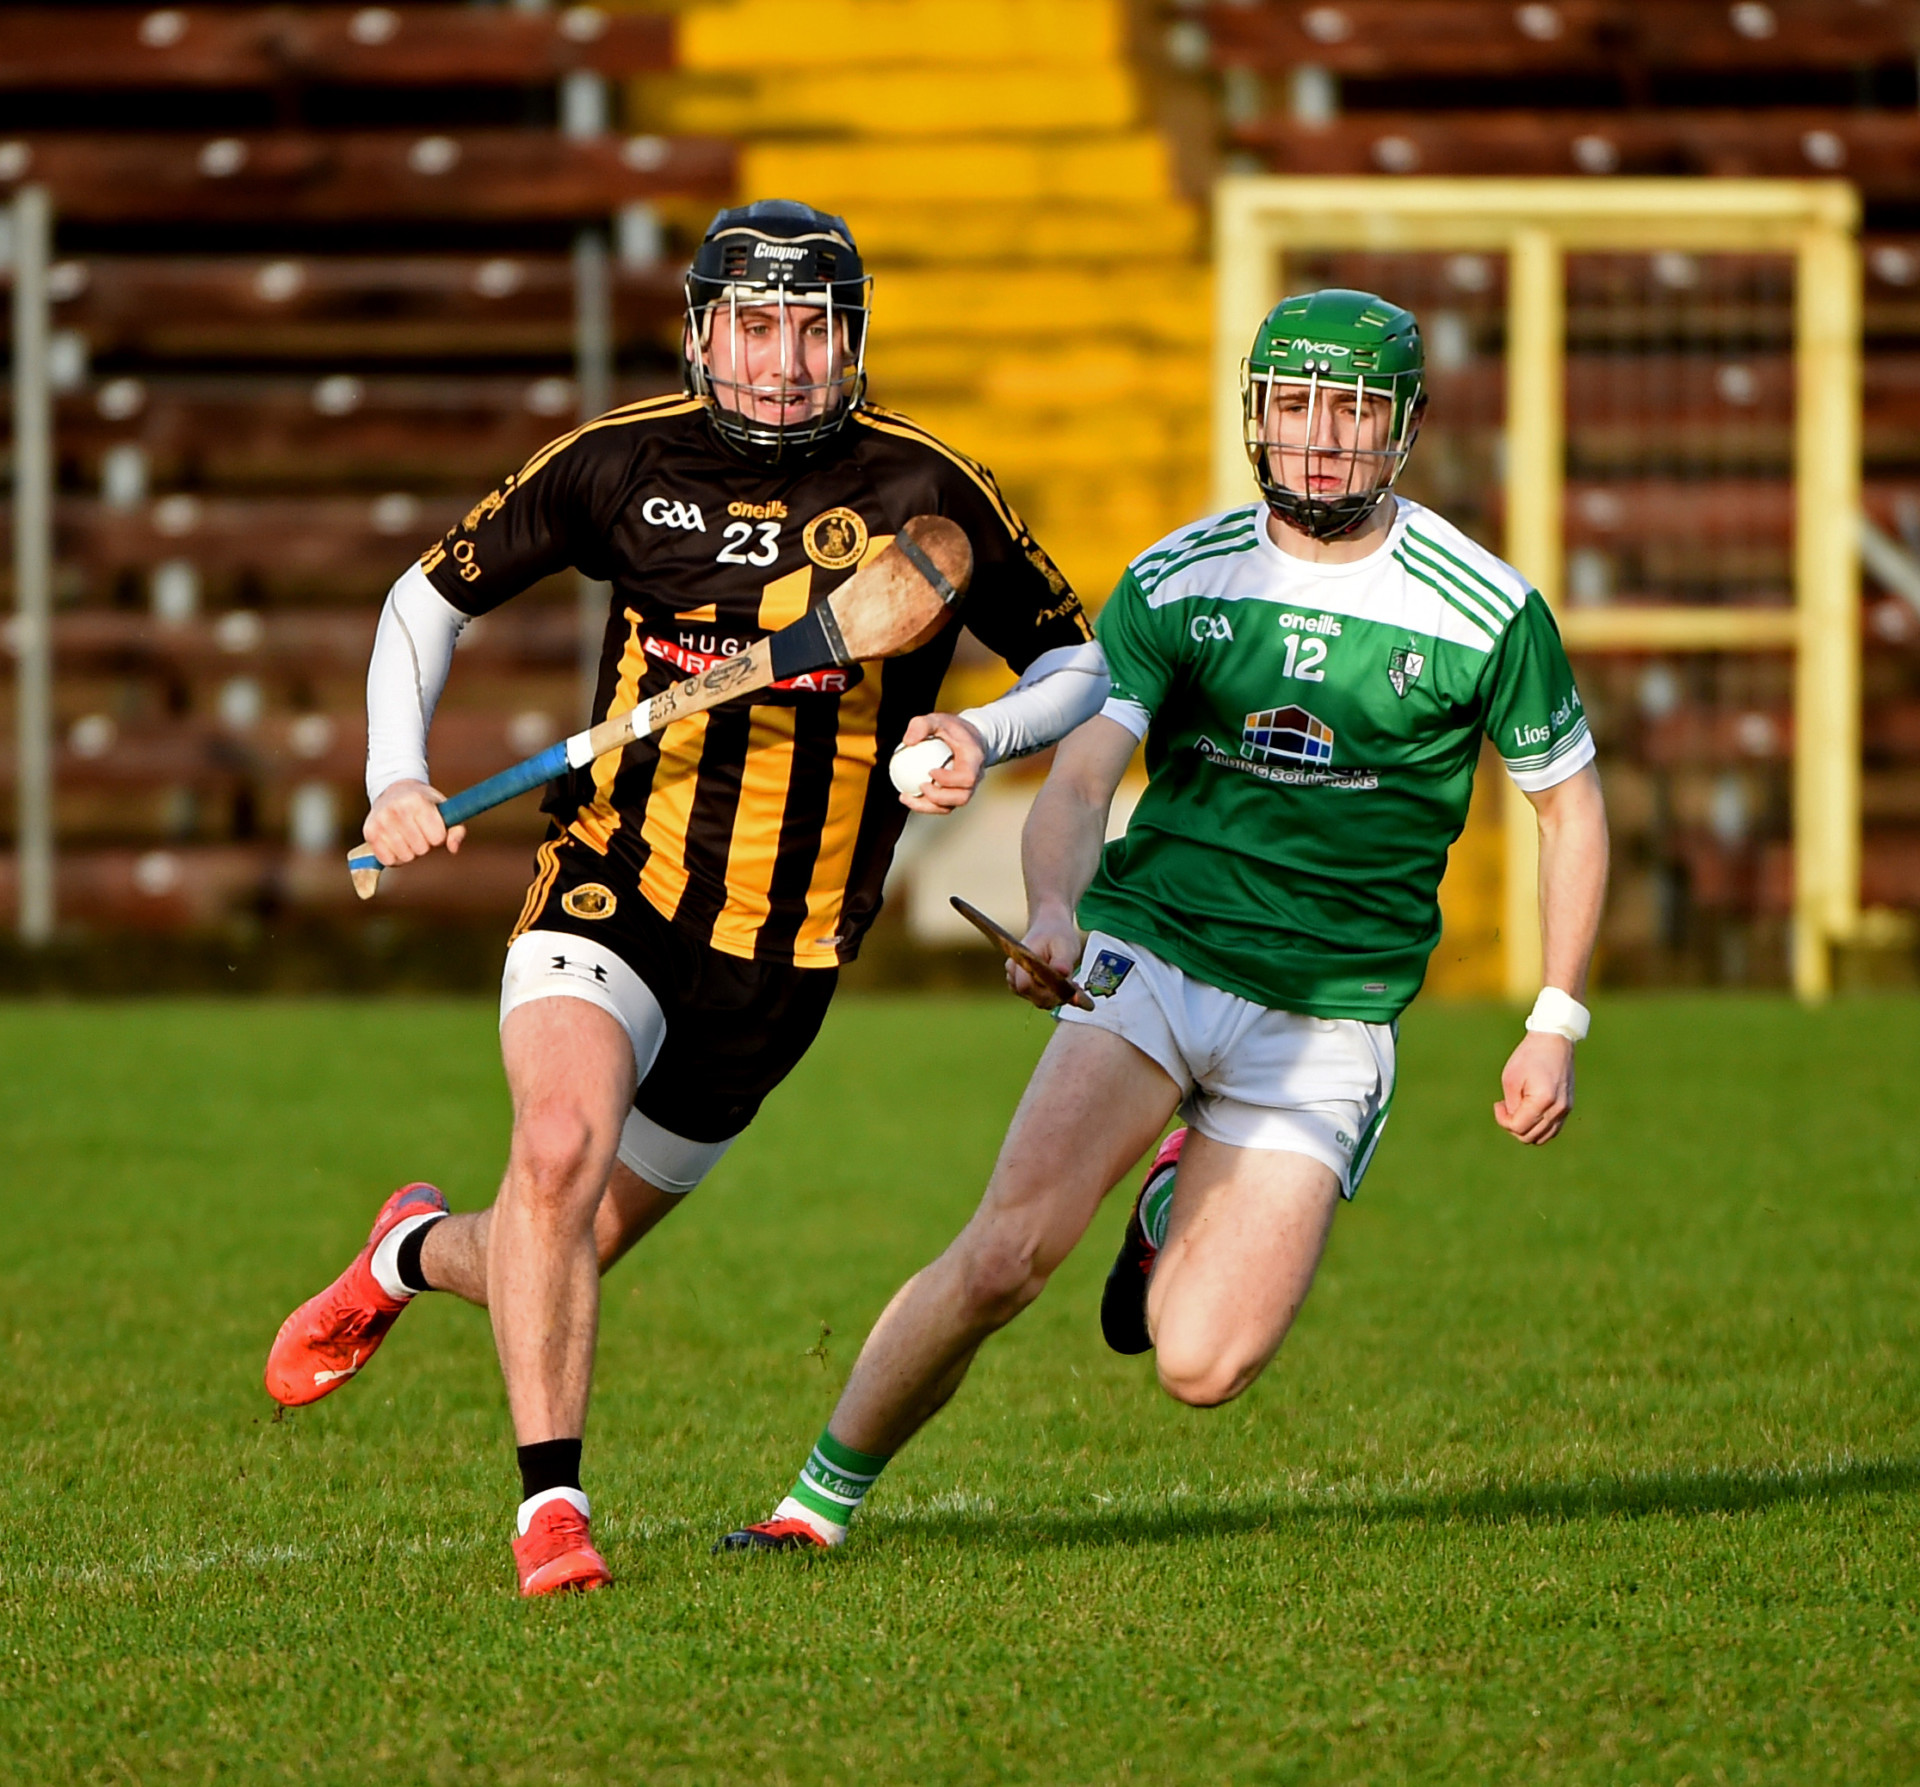 Holders Eire Ogs strong favourites to end NCC hurlers fairytale